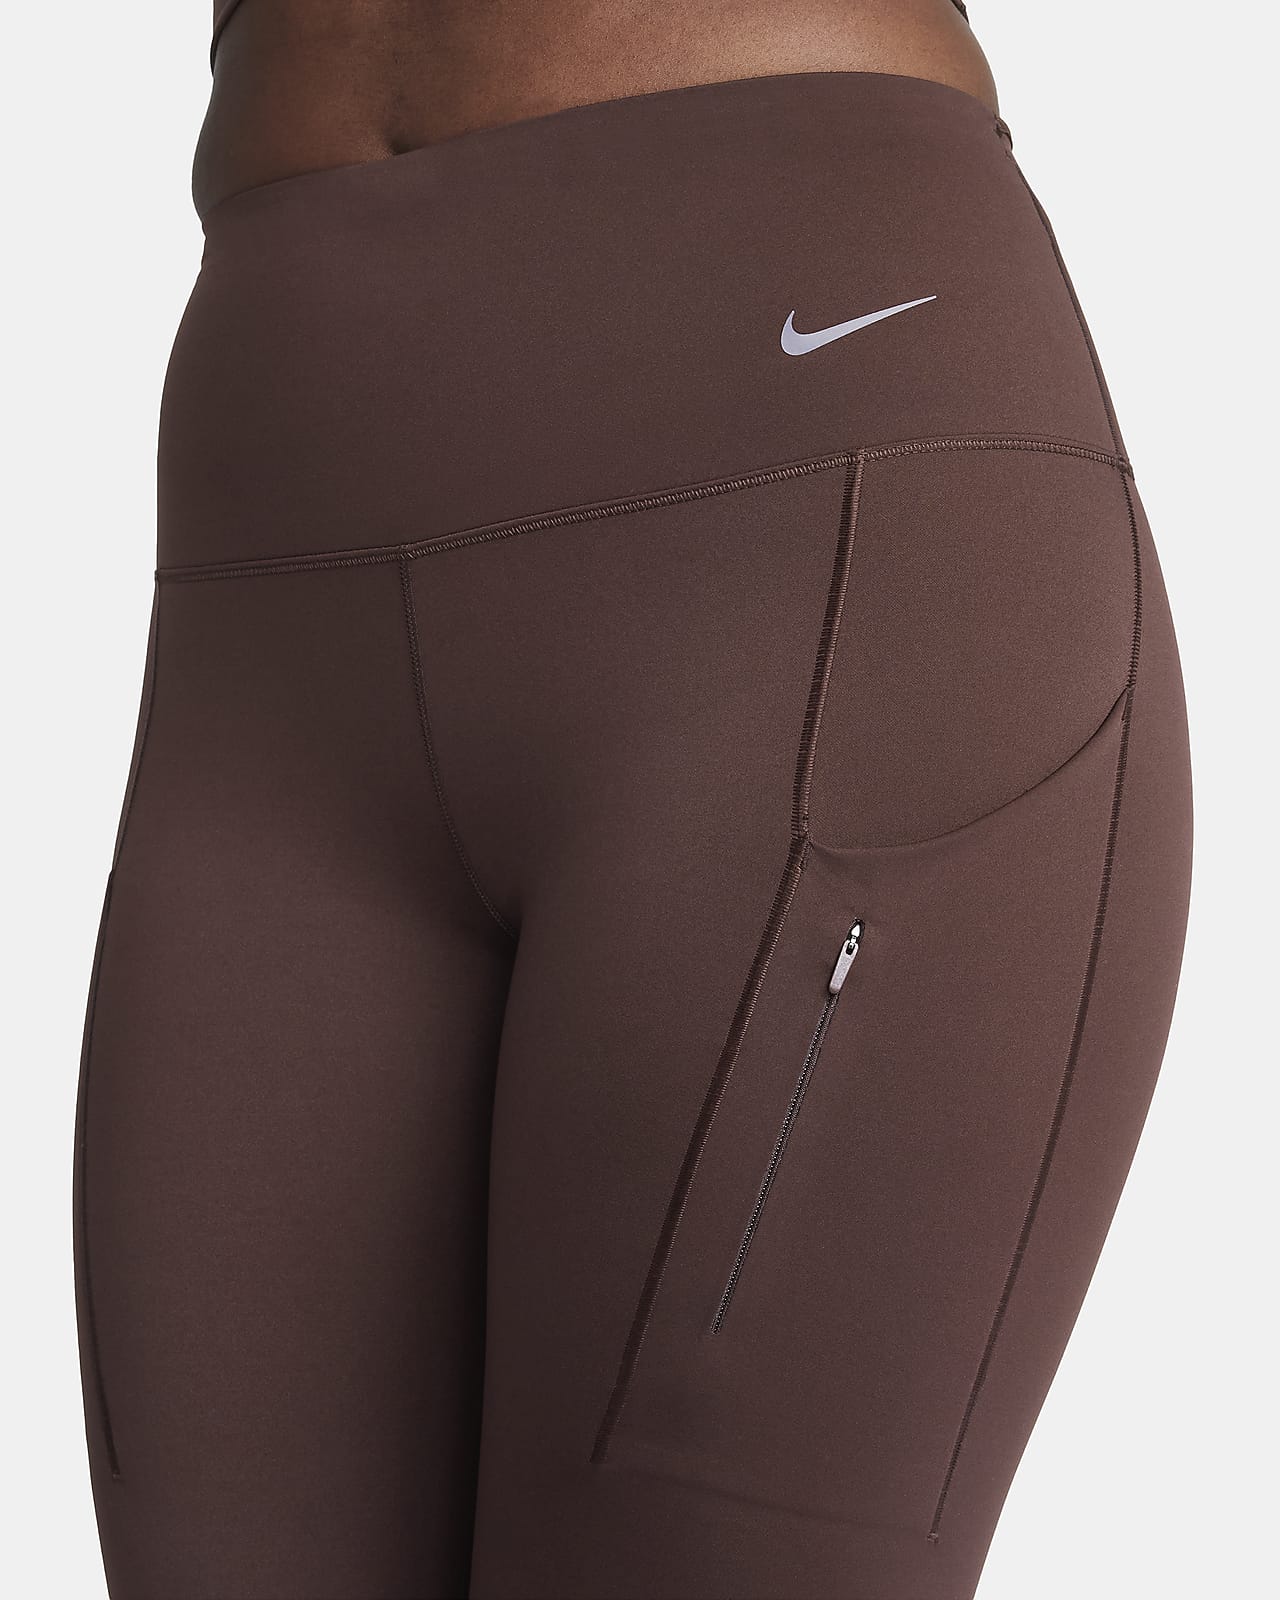 Nike Therma-FIT One 7/8 Women's Training Tights - Black/White